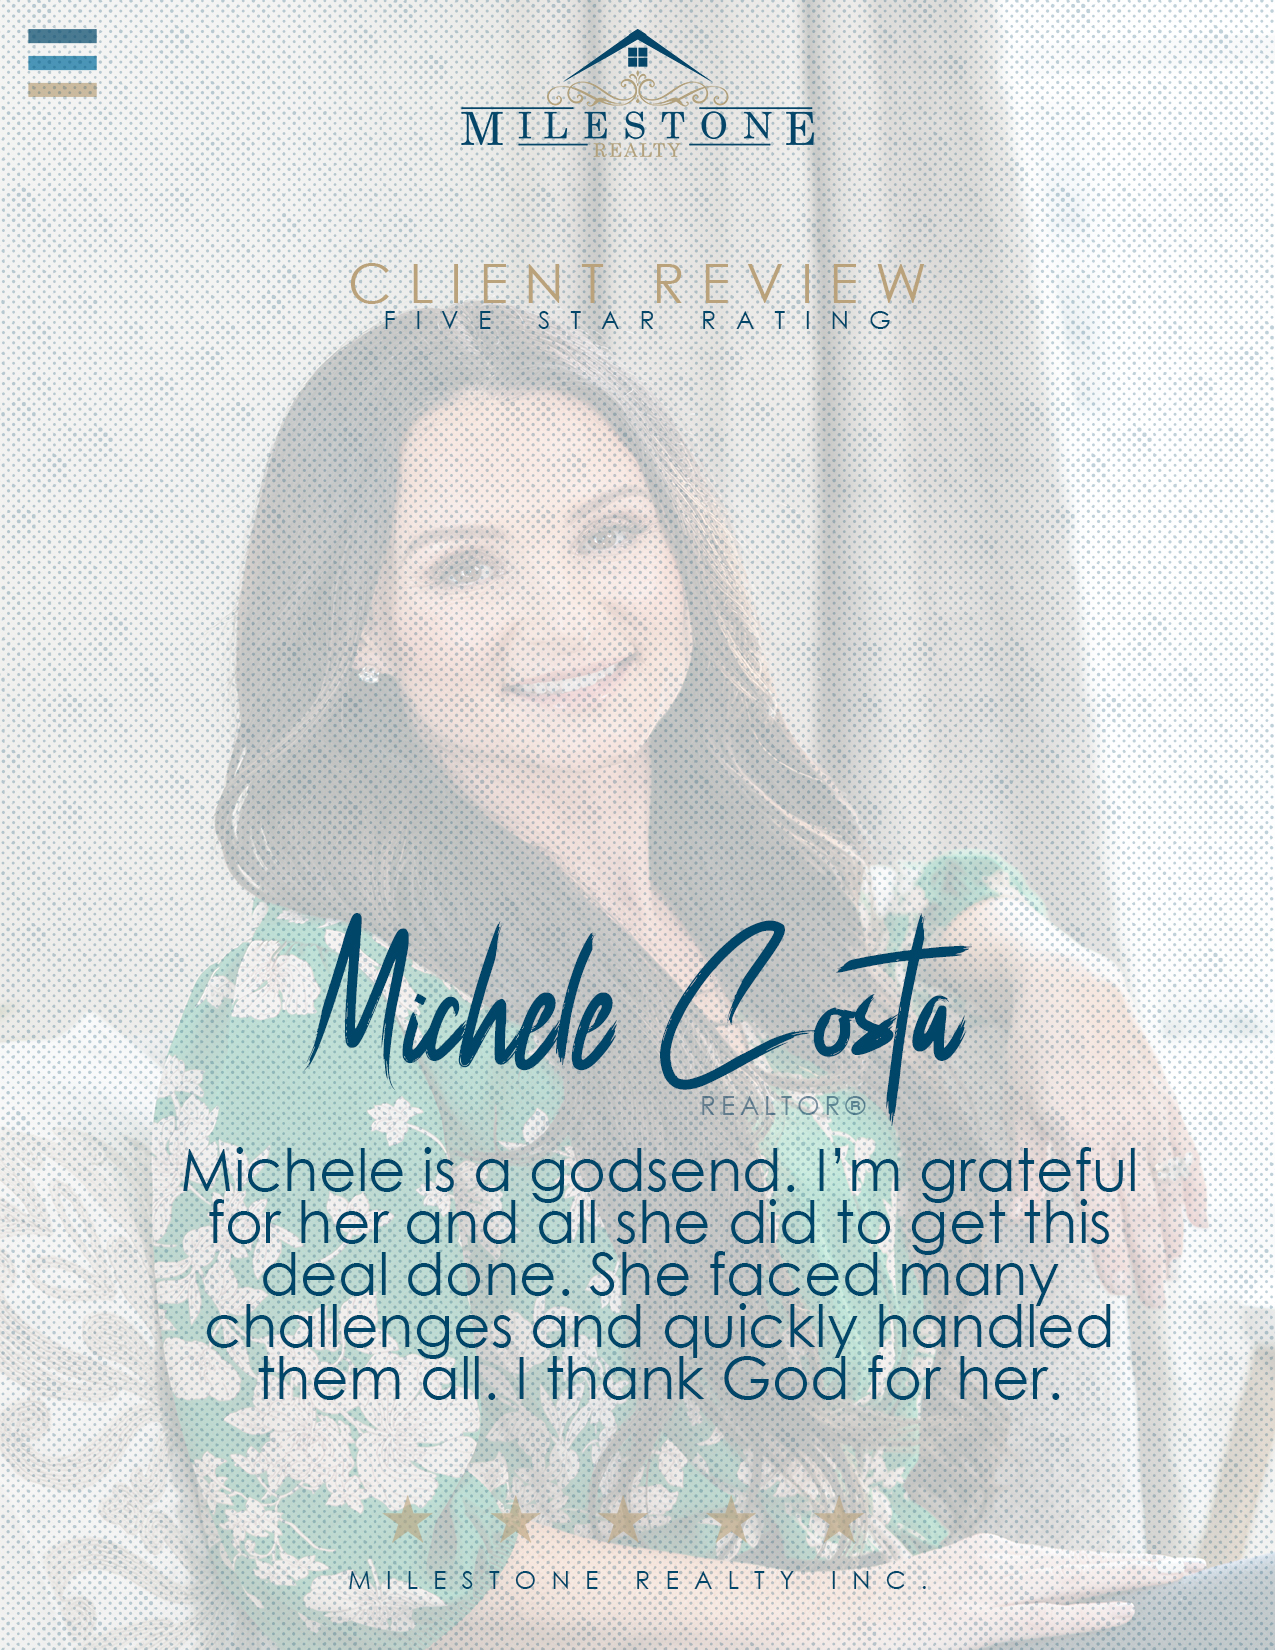 Michele Review